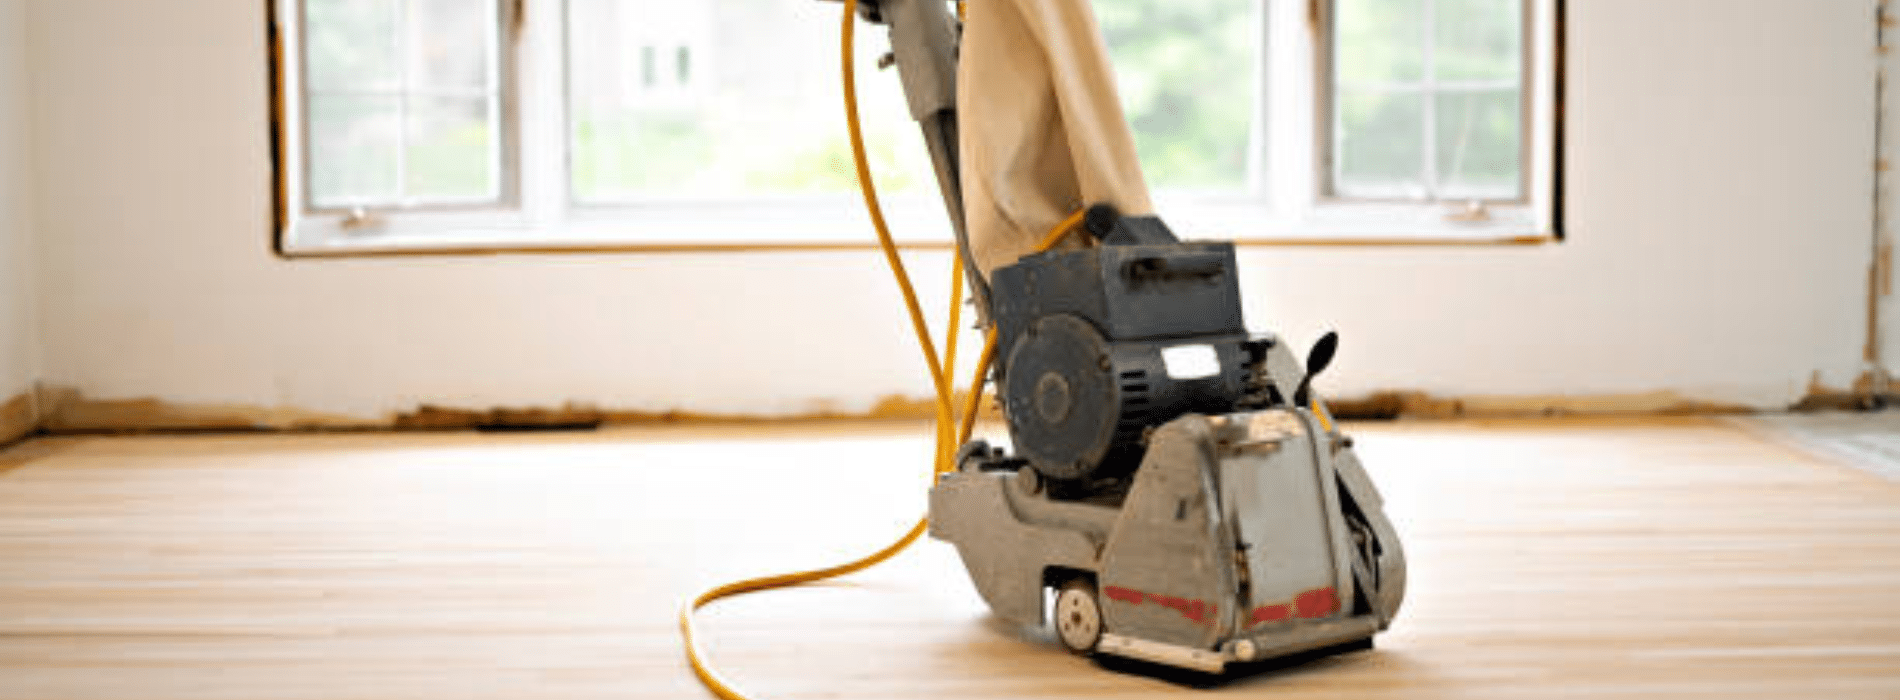 In Woolwich, SE18, Mr Sander® use the Bona Belt UX sander (2.2 kW, 230V, 50 Hz) with a 200x750 mm size. Connect it to a dust extraction system with a HEPA filter for a clean and efficient sanding of parquet floors.